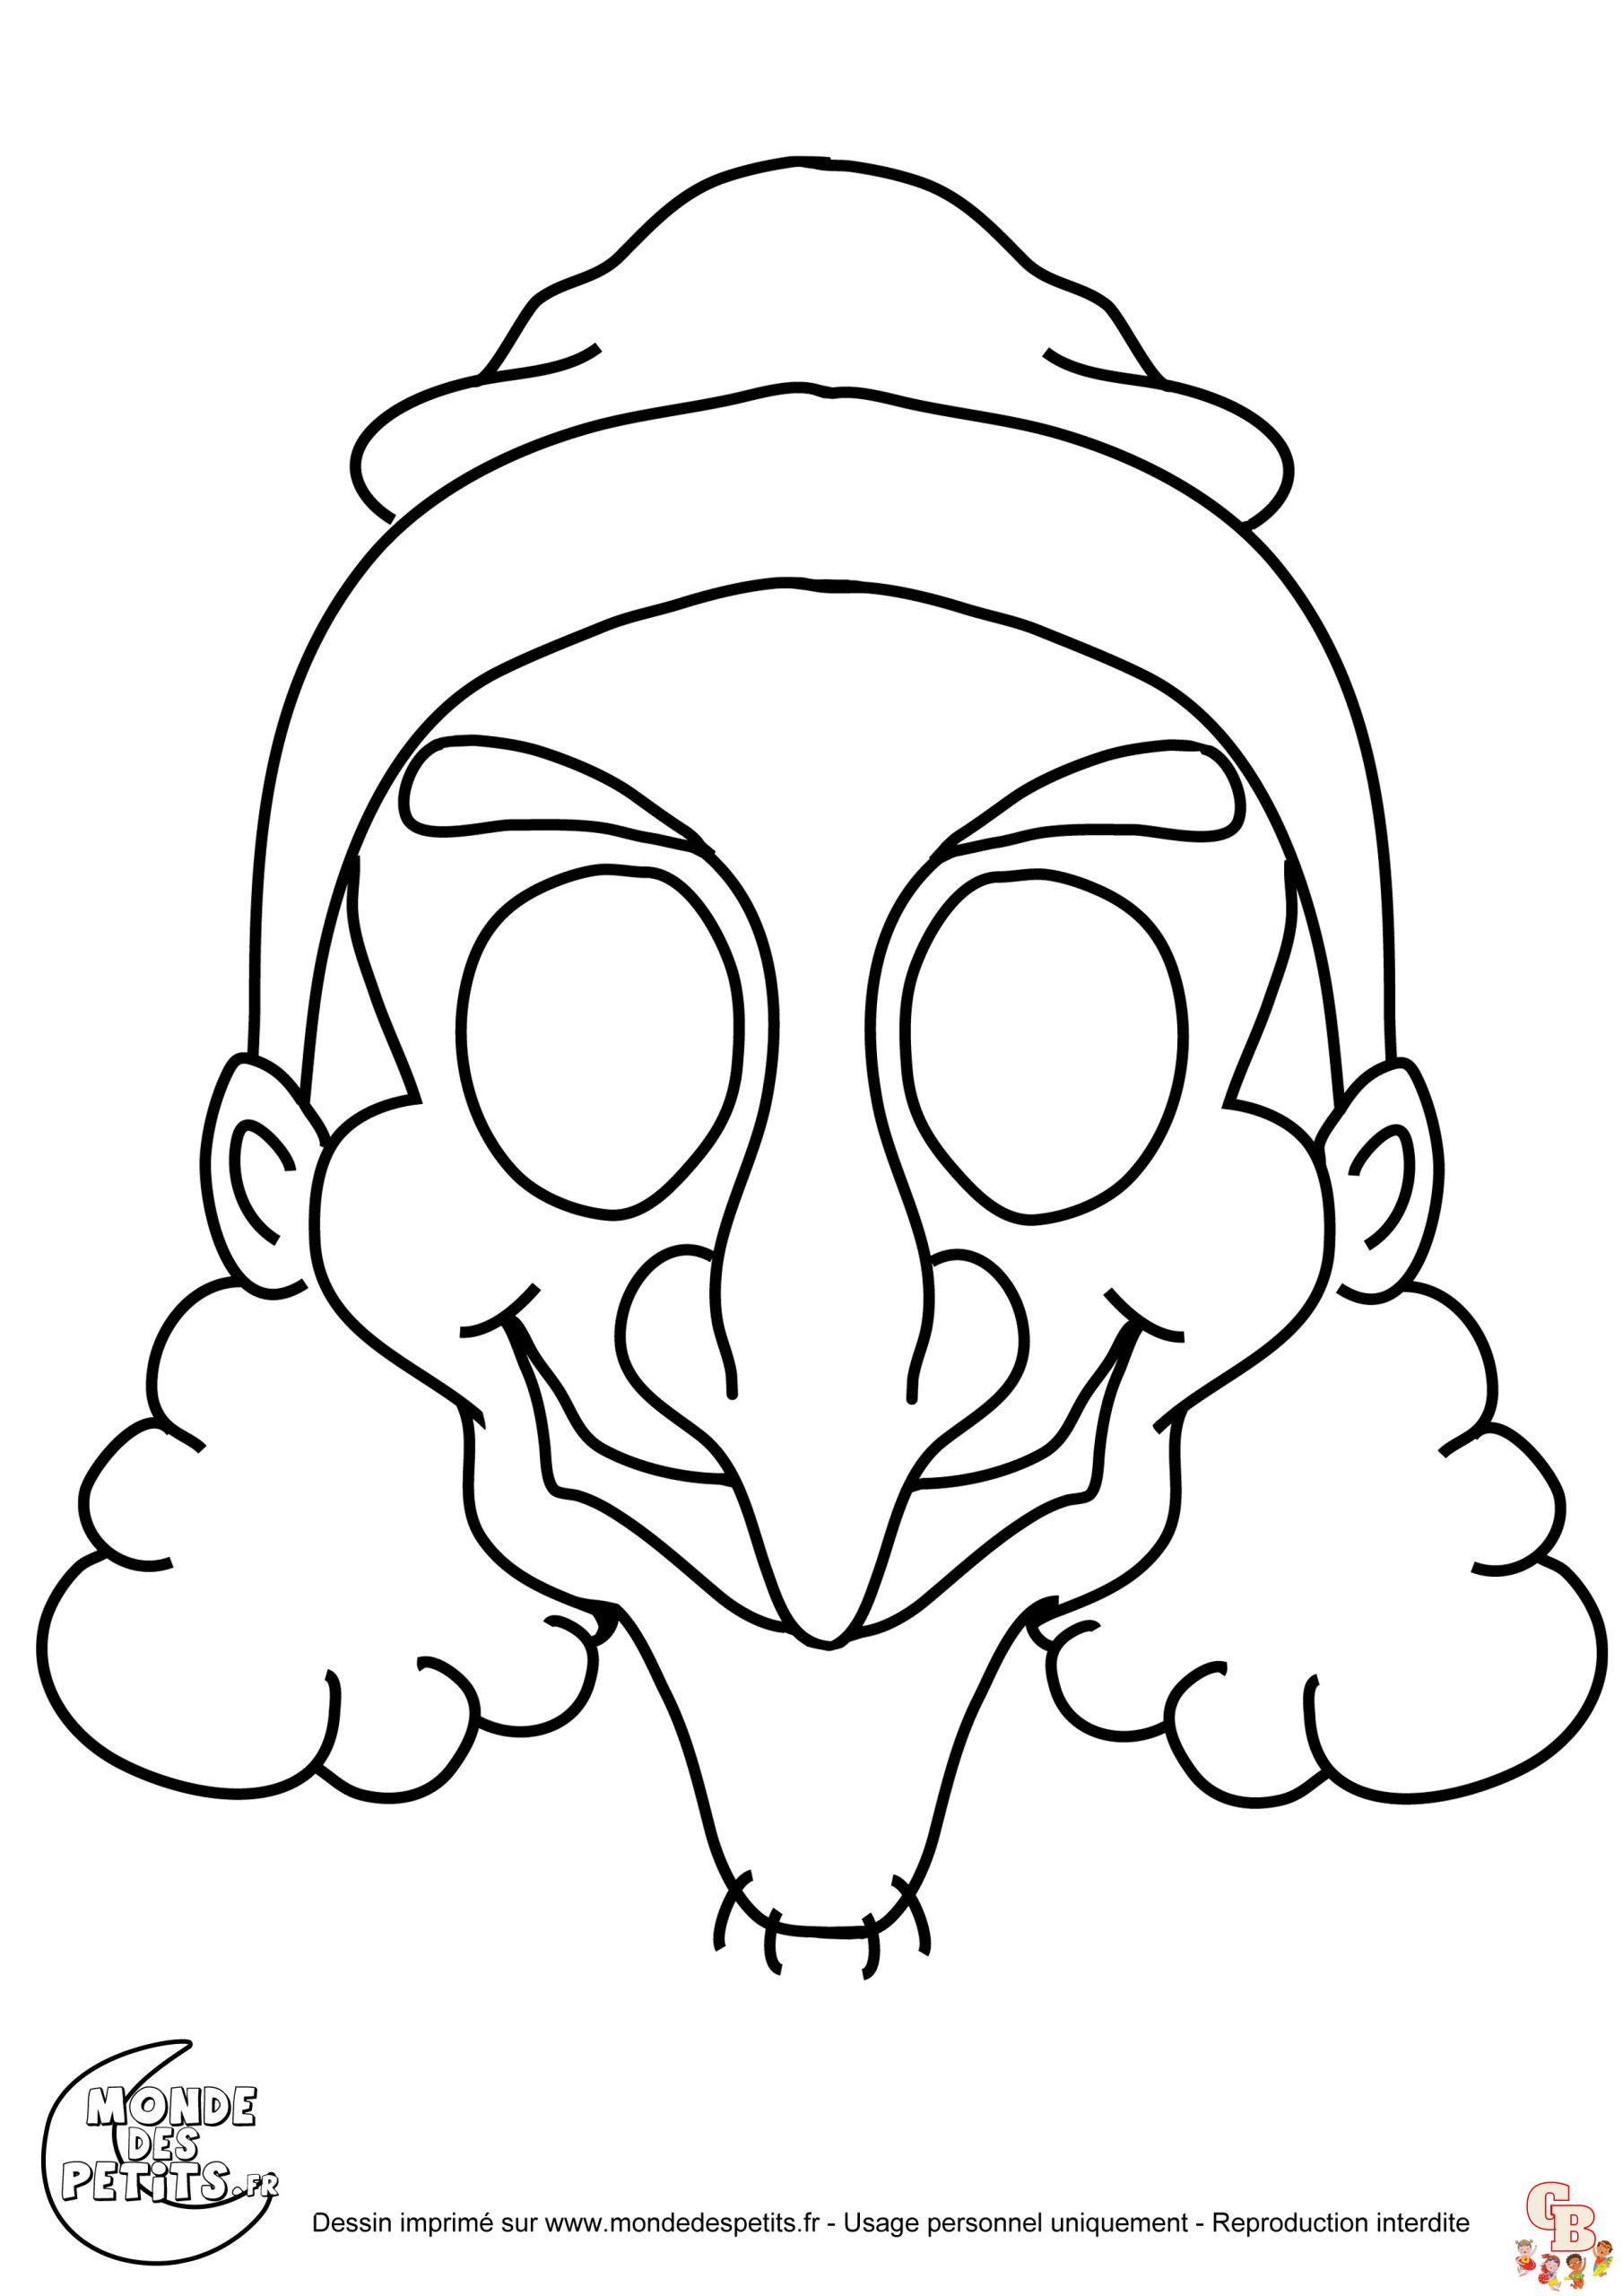 Halloween Ghost Coloring Page